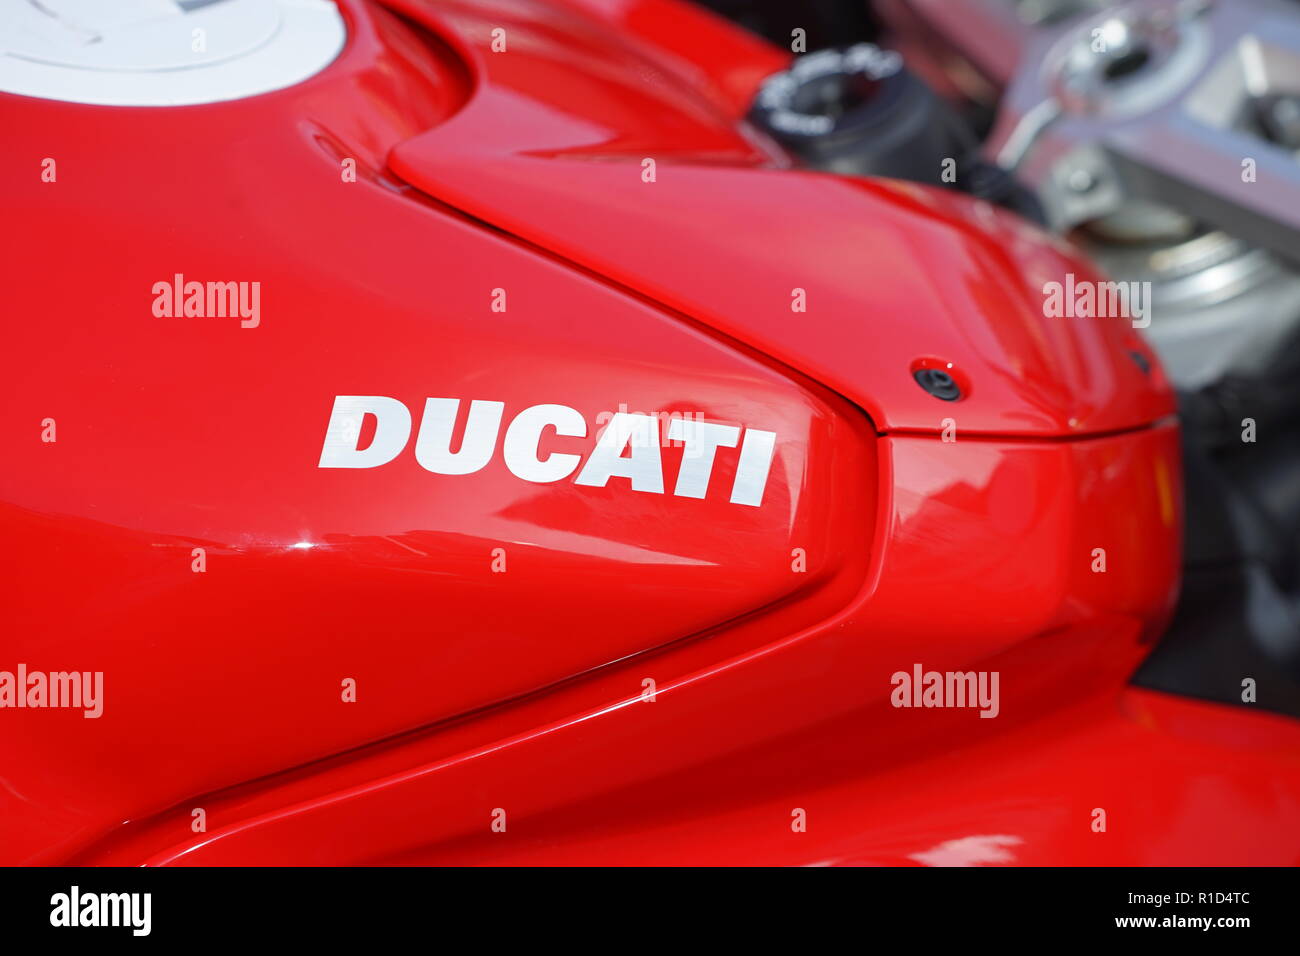 Ducati Logo High Resolution Stock Photography and Images - Alamy